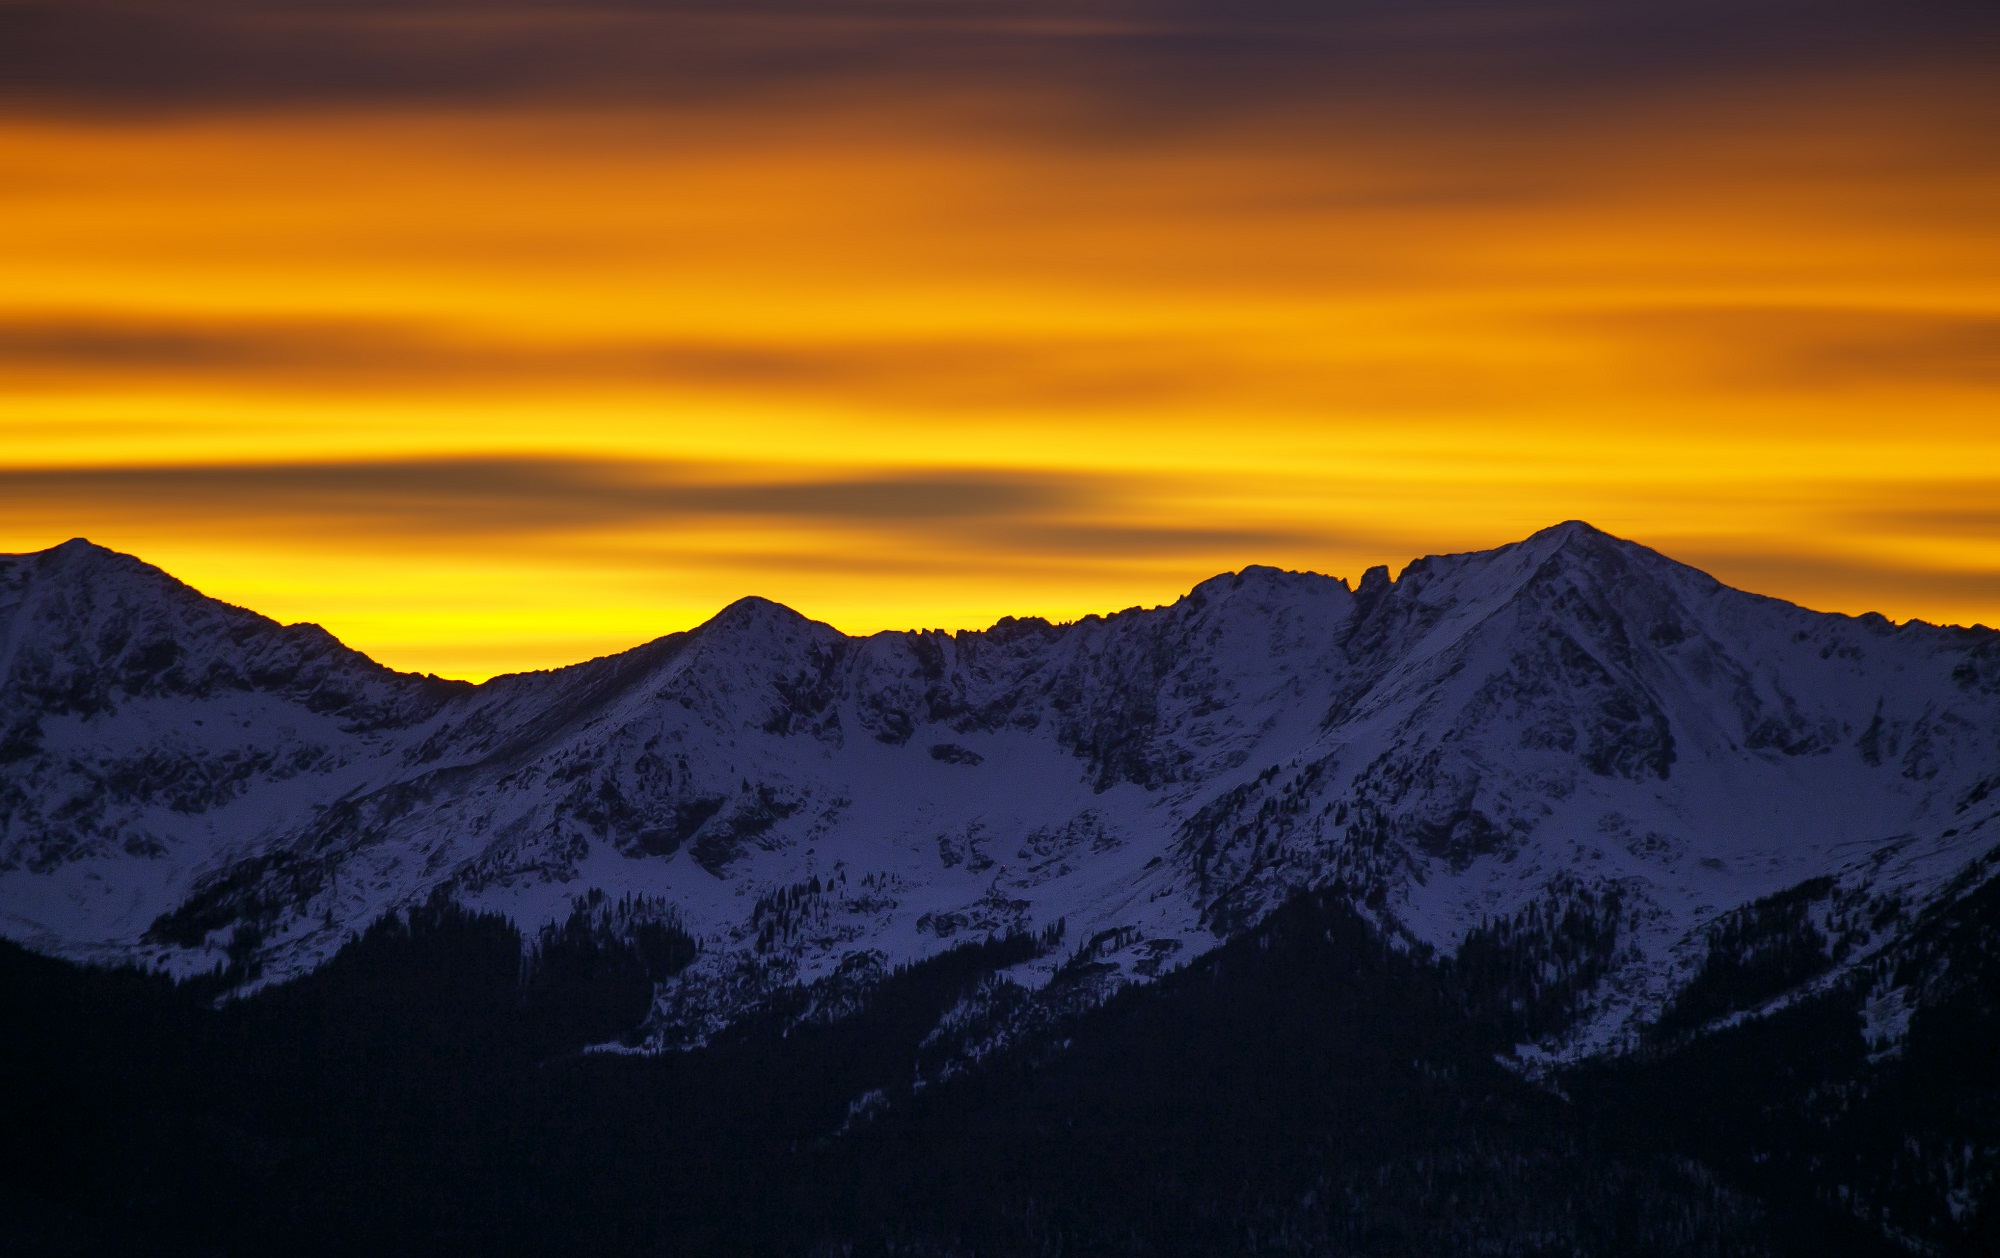 A layered orange and yellow sunset above the mountains